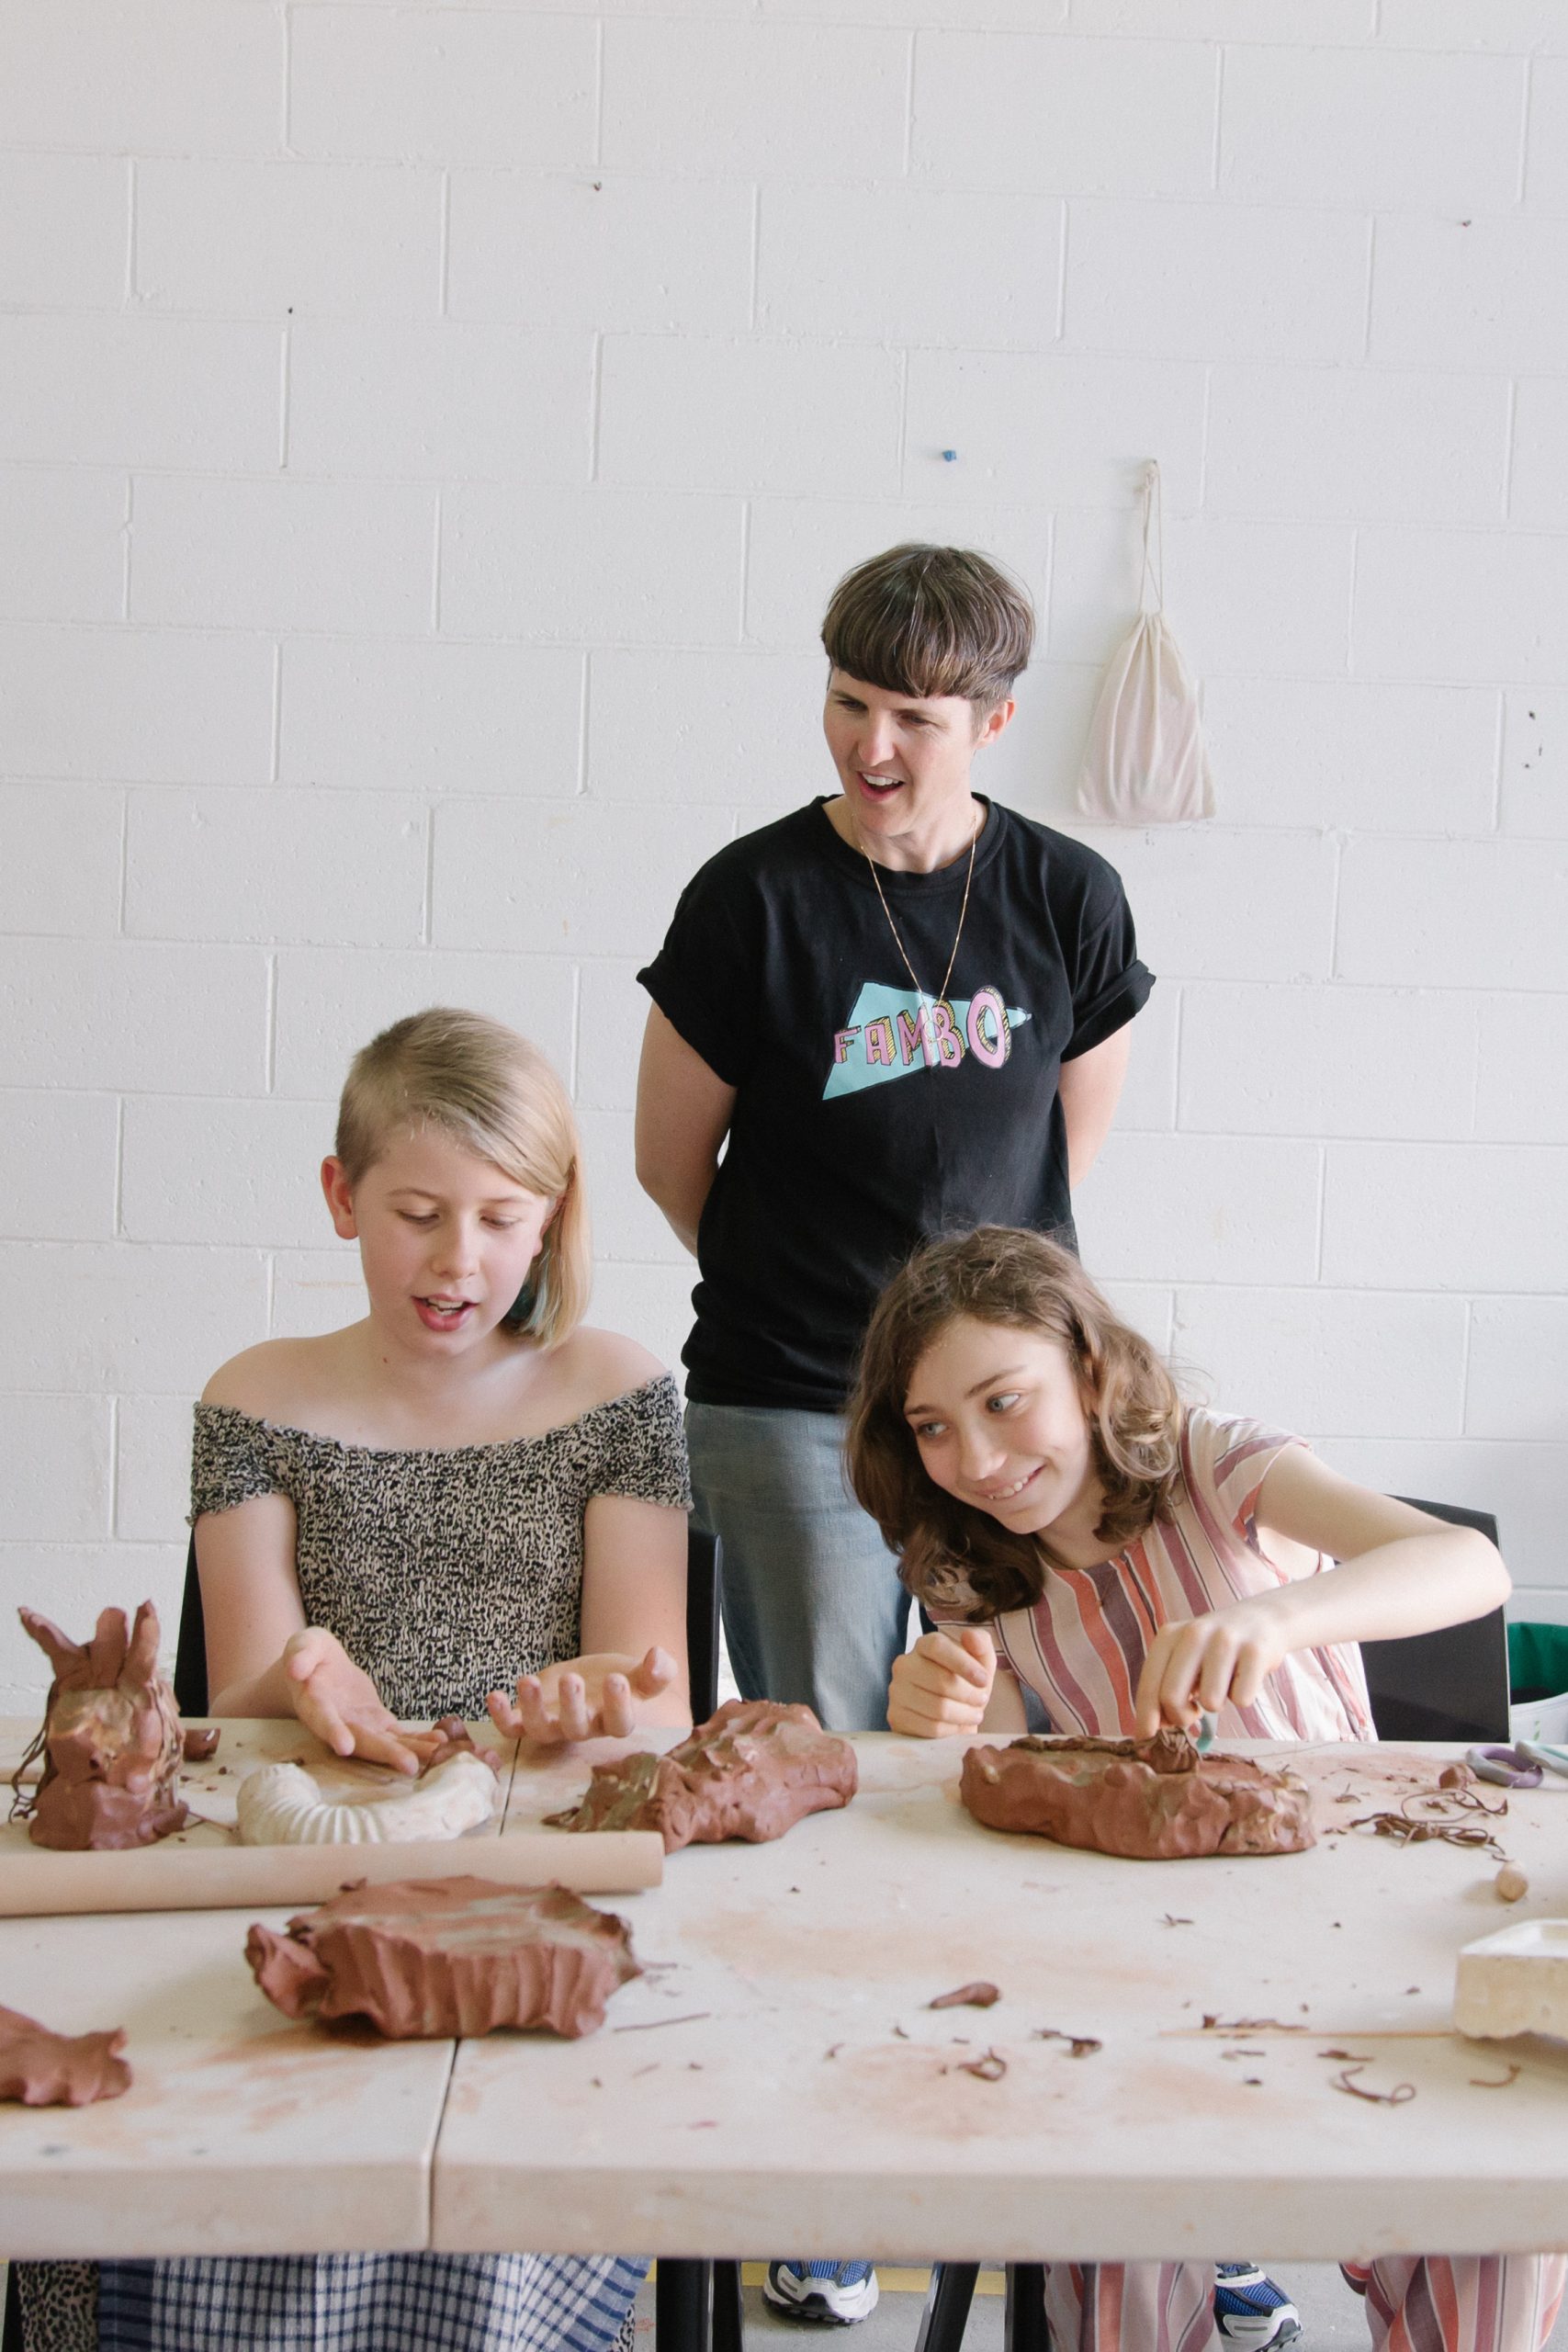 Two kids are creating clay figures, with an adult looking impressed behind them, wearing a Fambo tshirt